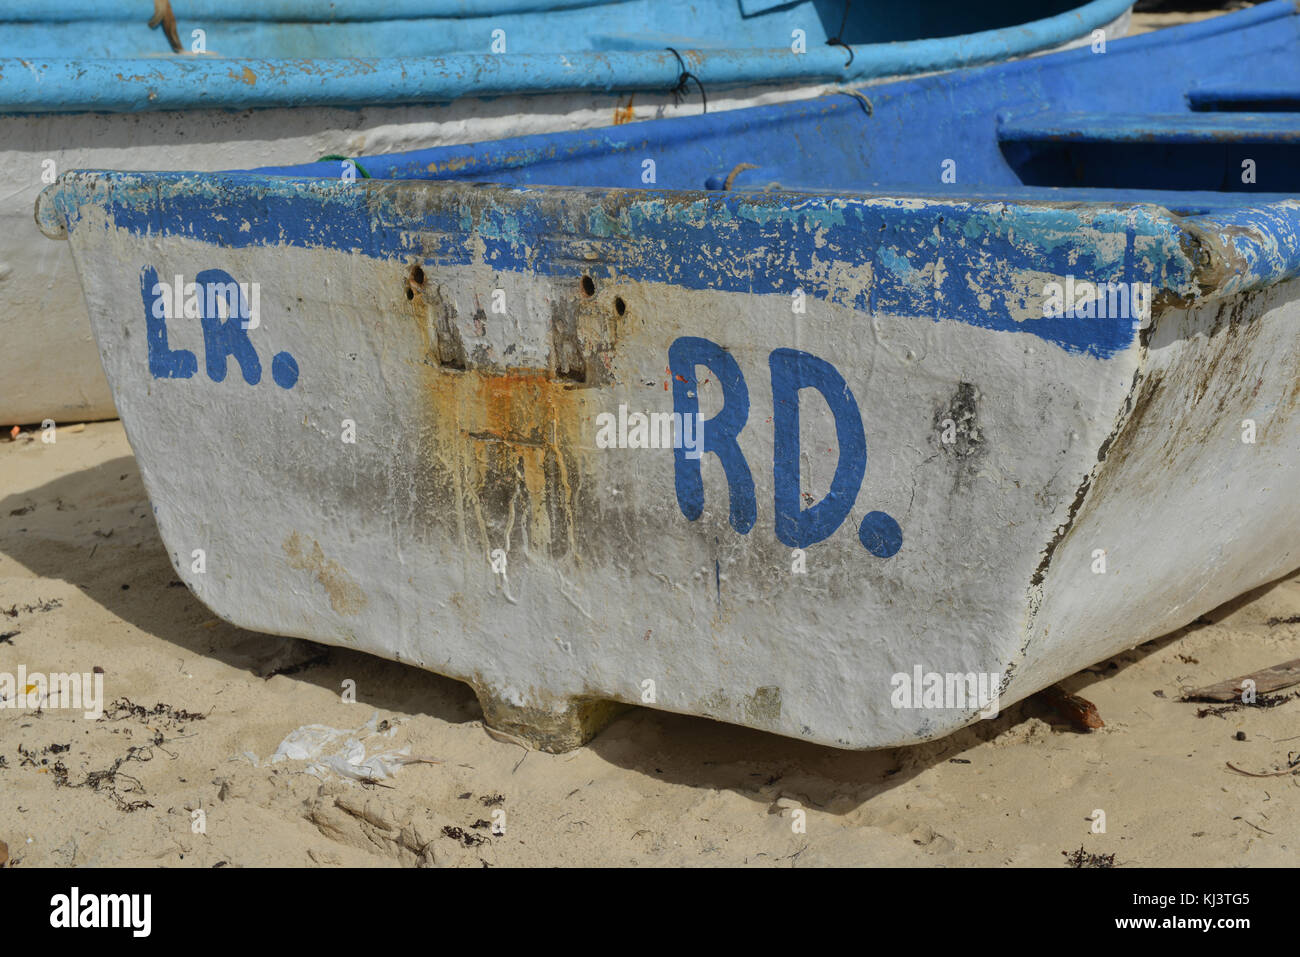 PUNTA CANA, DOMINICAN REPUBLIC - AUGUST 31, 2014: Boat in  Macao Beach in Punta Cana, Dominican Republic Stock Photo